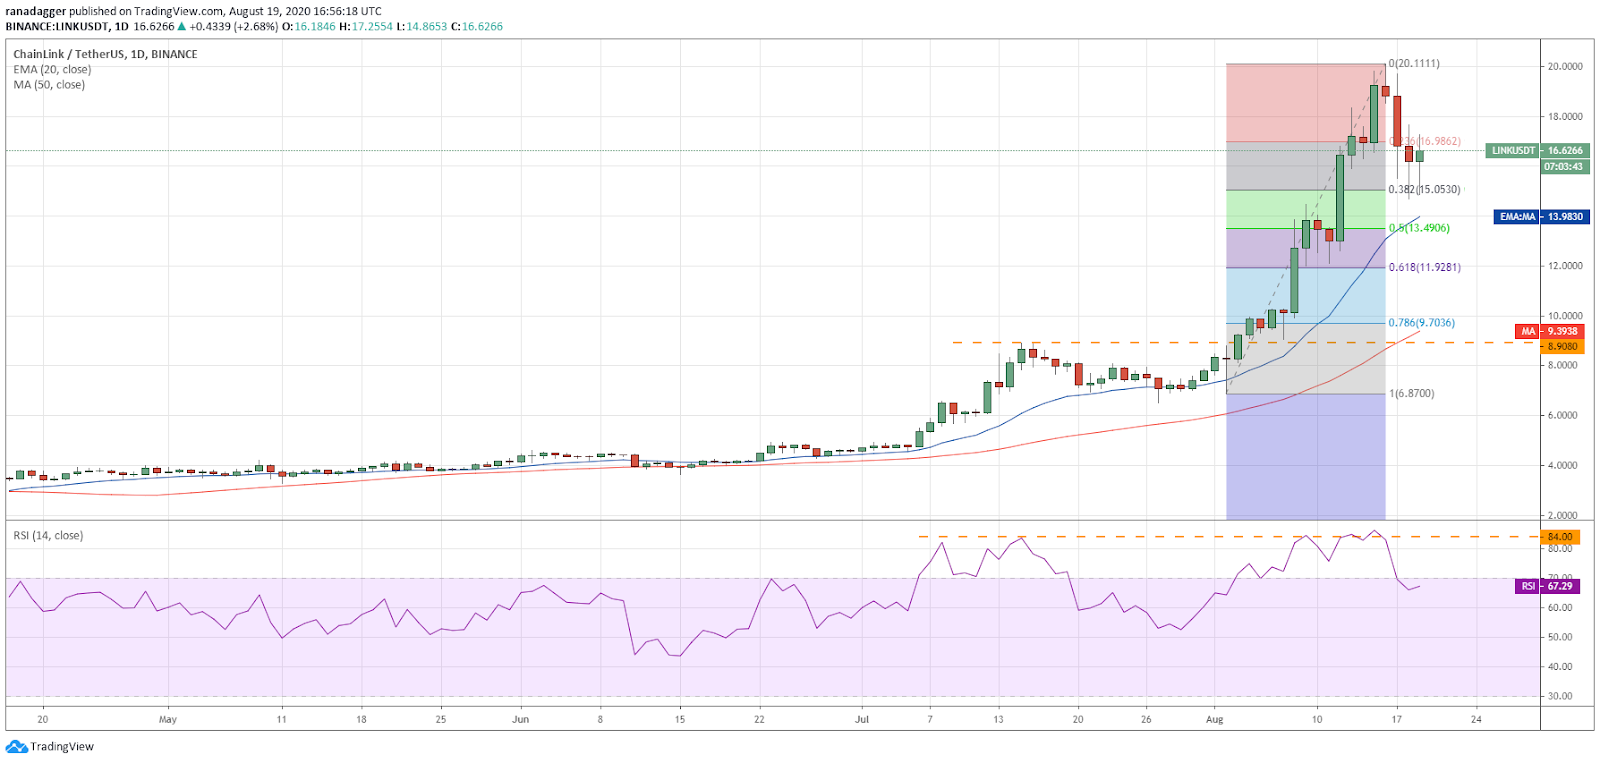 LINK/USD daily chart. Source: TradingView​​​​​​​